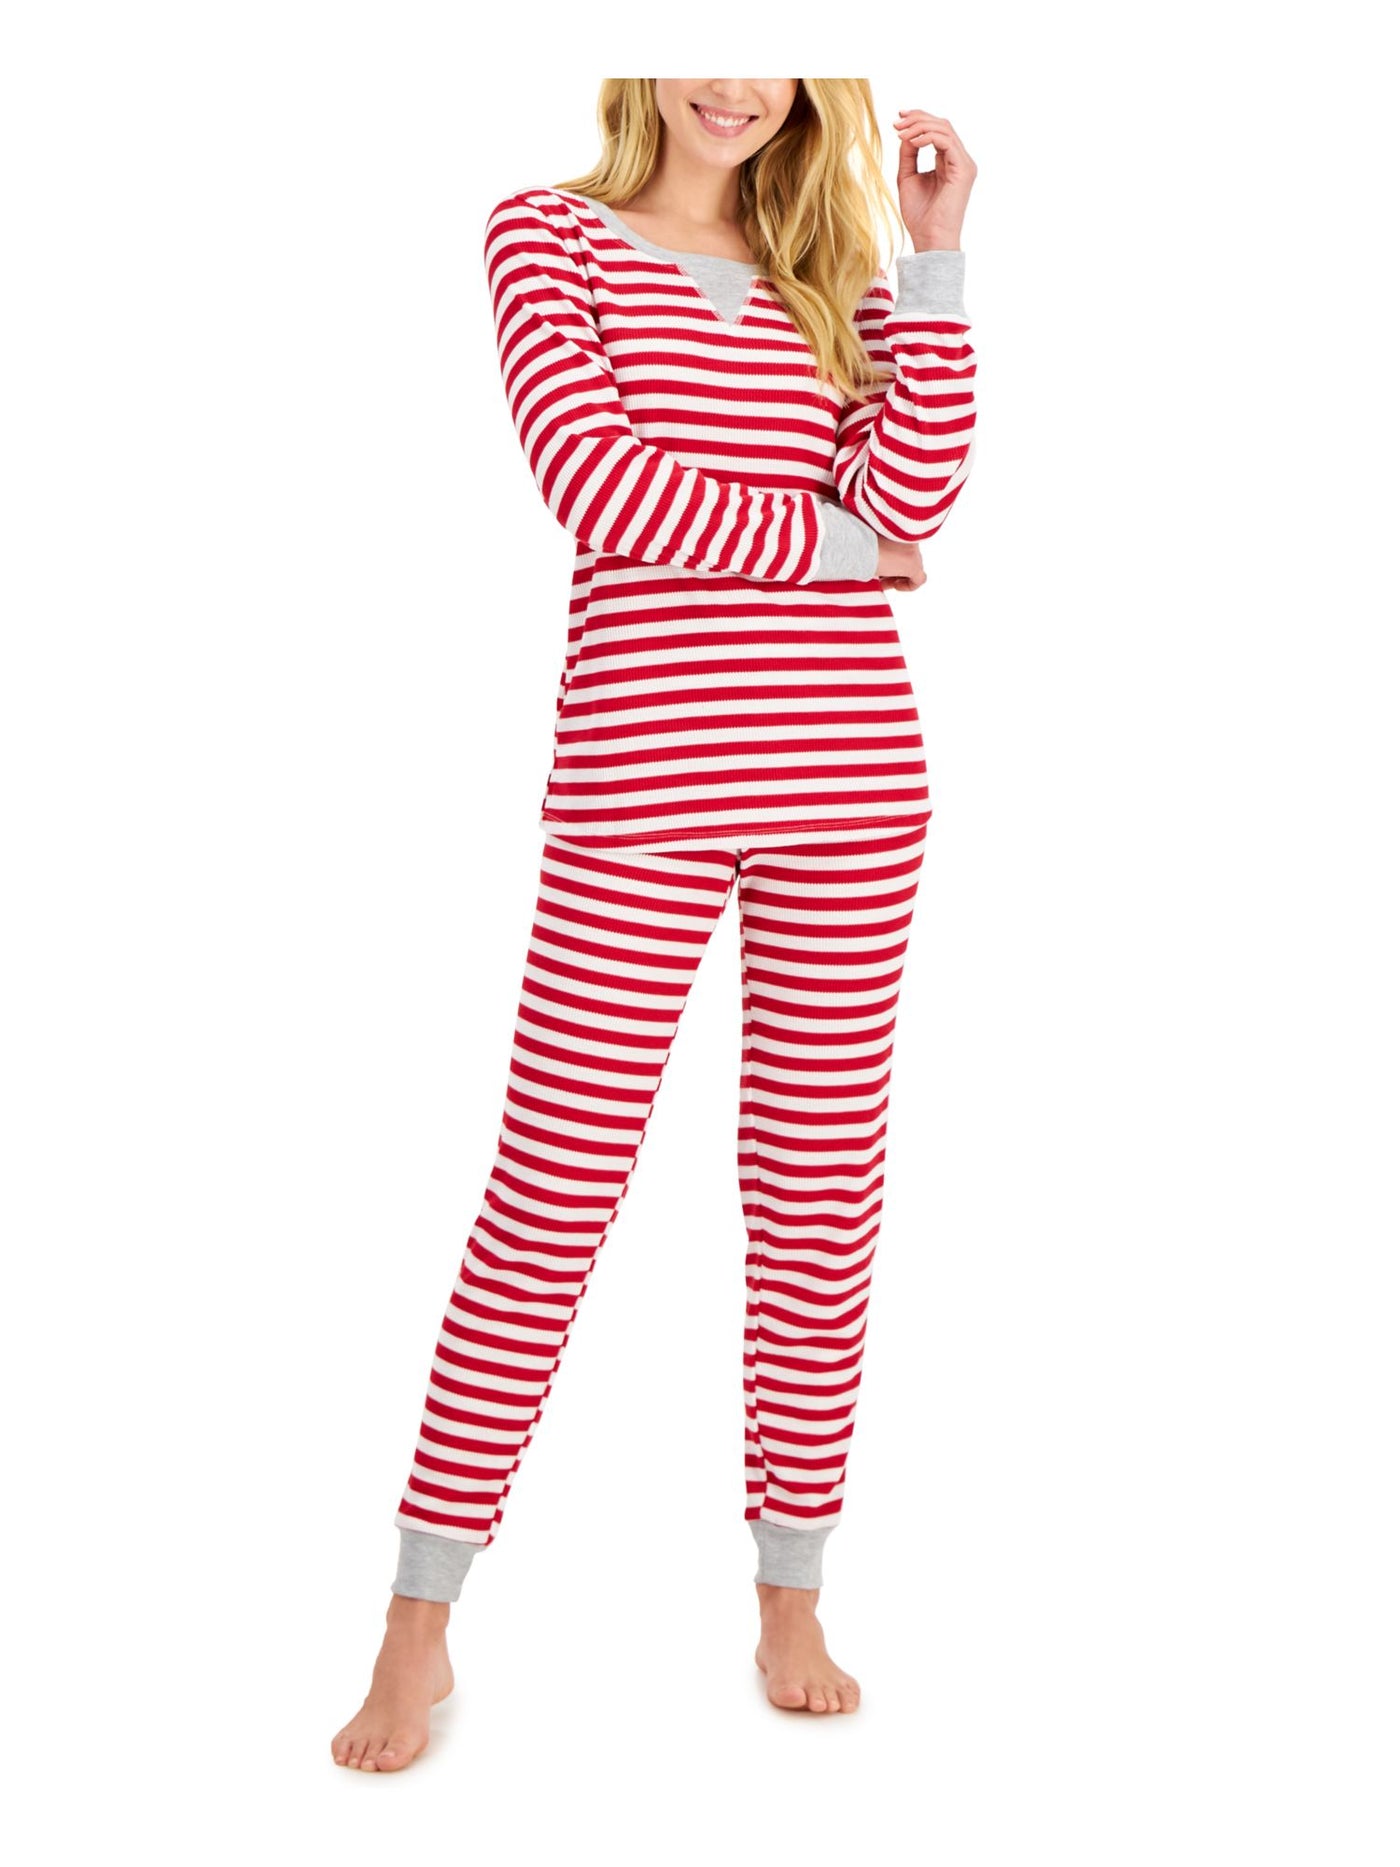 FAMILY PJs Womens Red Striped Top Ribbed Cuffed Pants Pajamas M